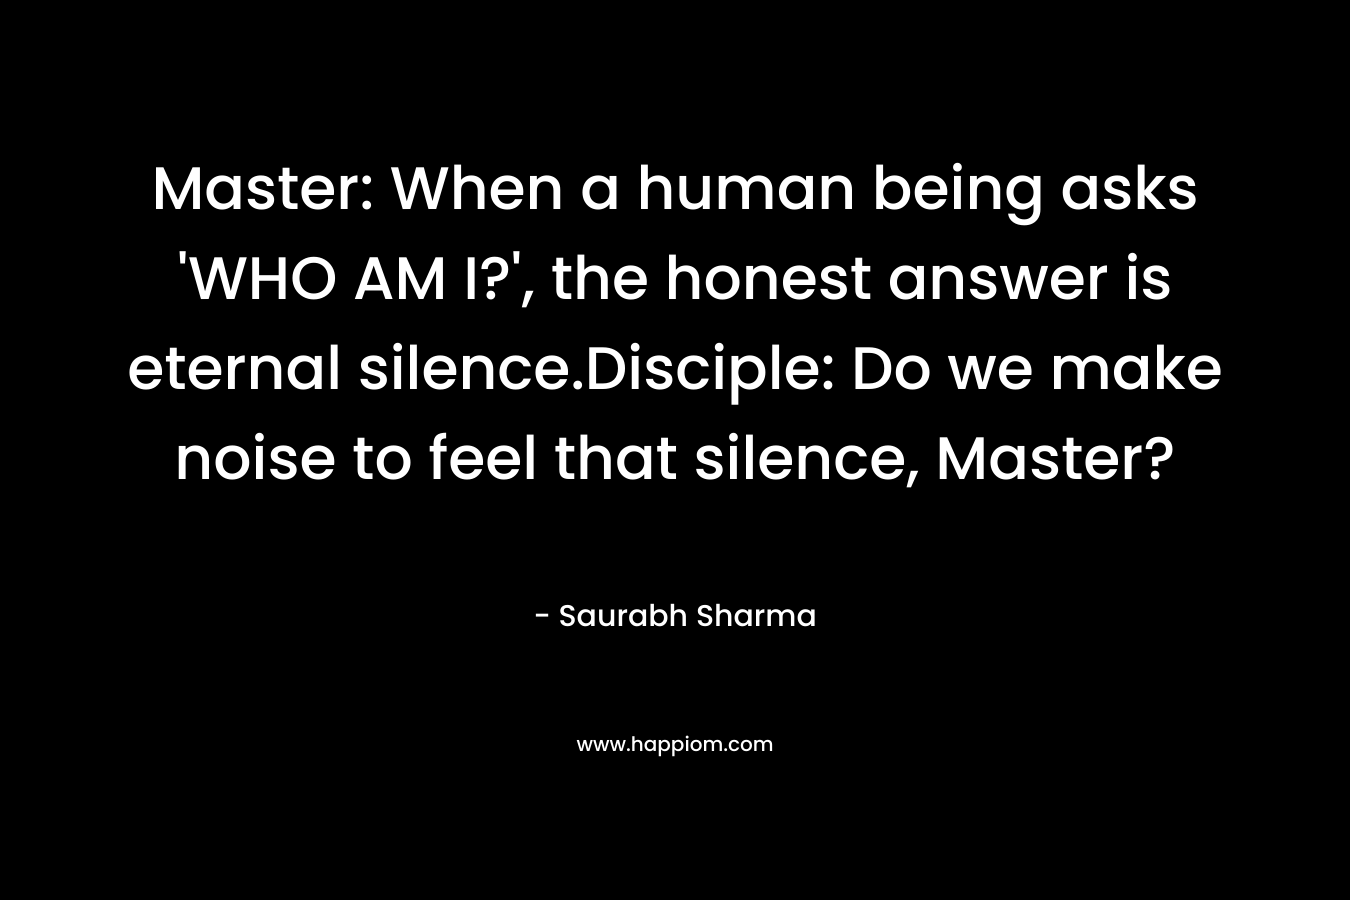 Master: When a human being asks 'WHO AM I?', the honest answer is eternal silence.Disciple: Do we make noise to feel that silence, Master?